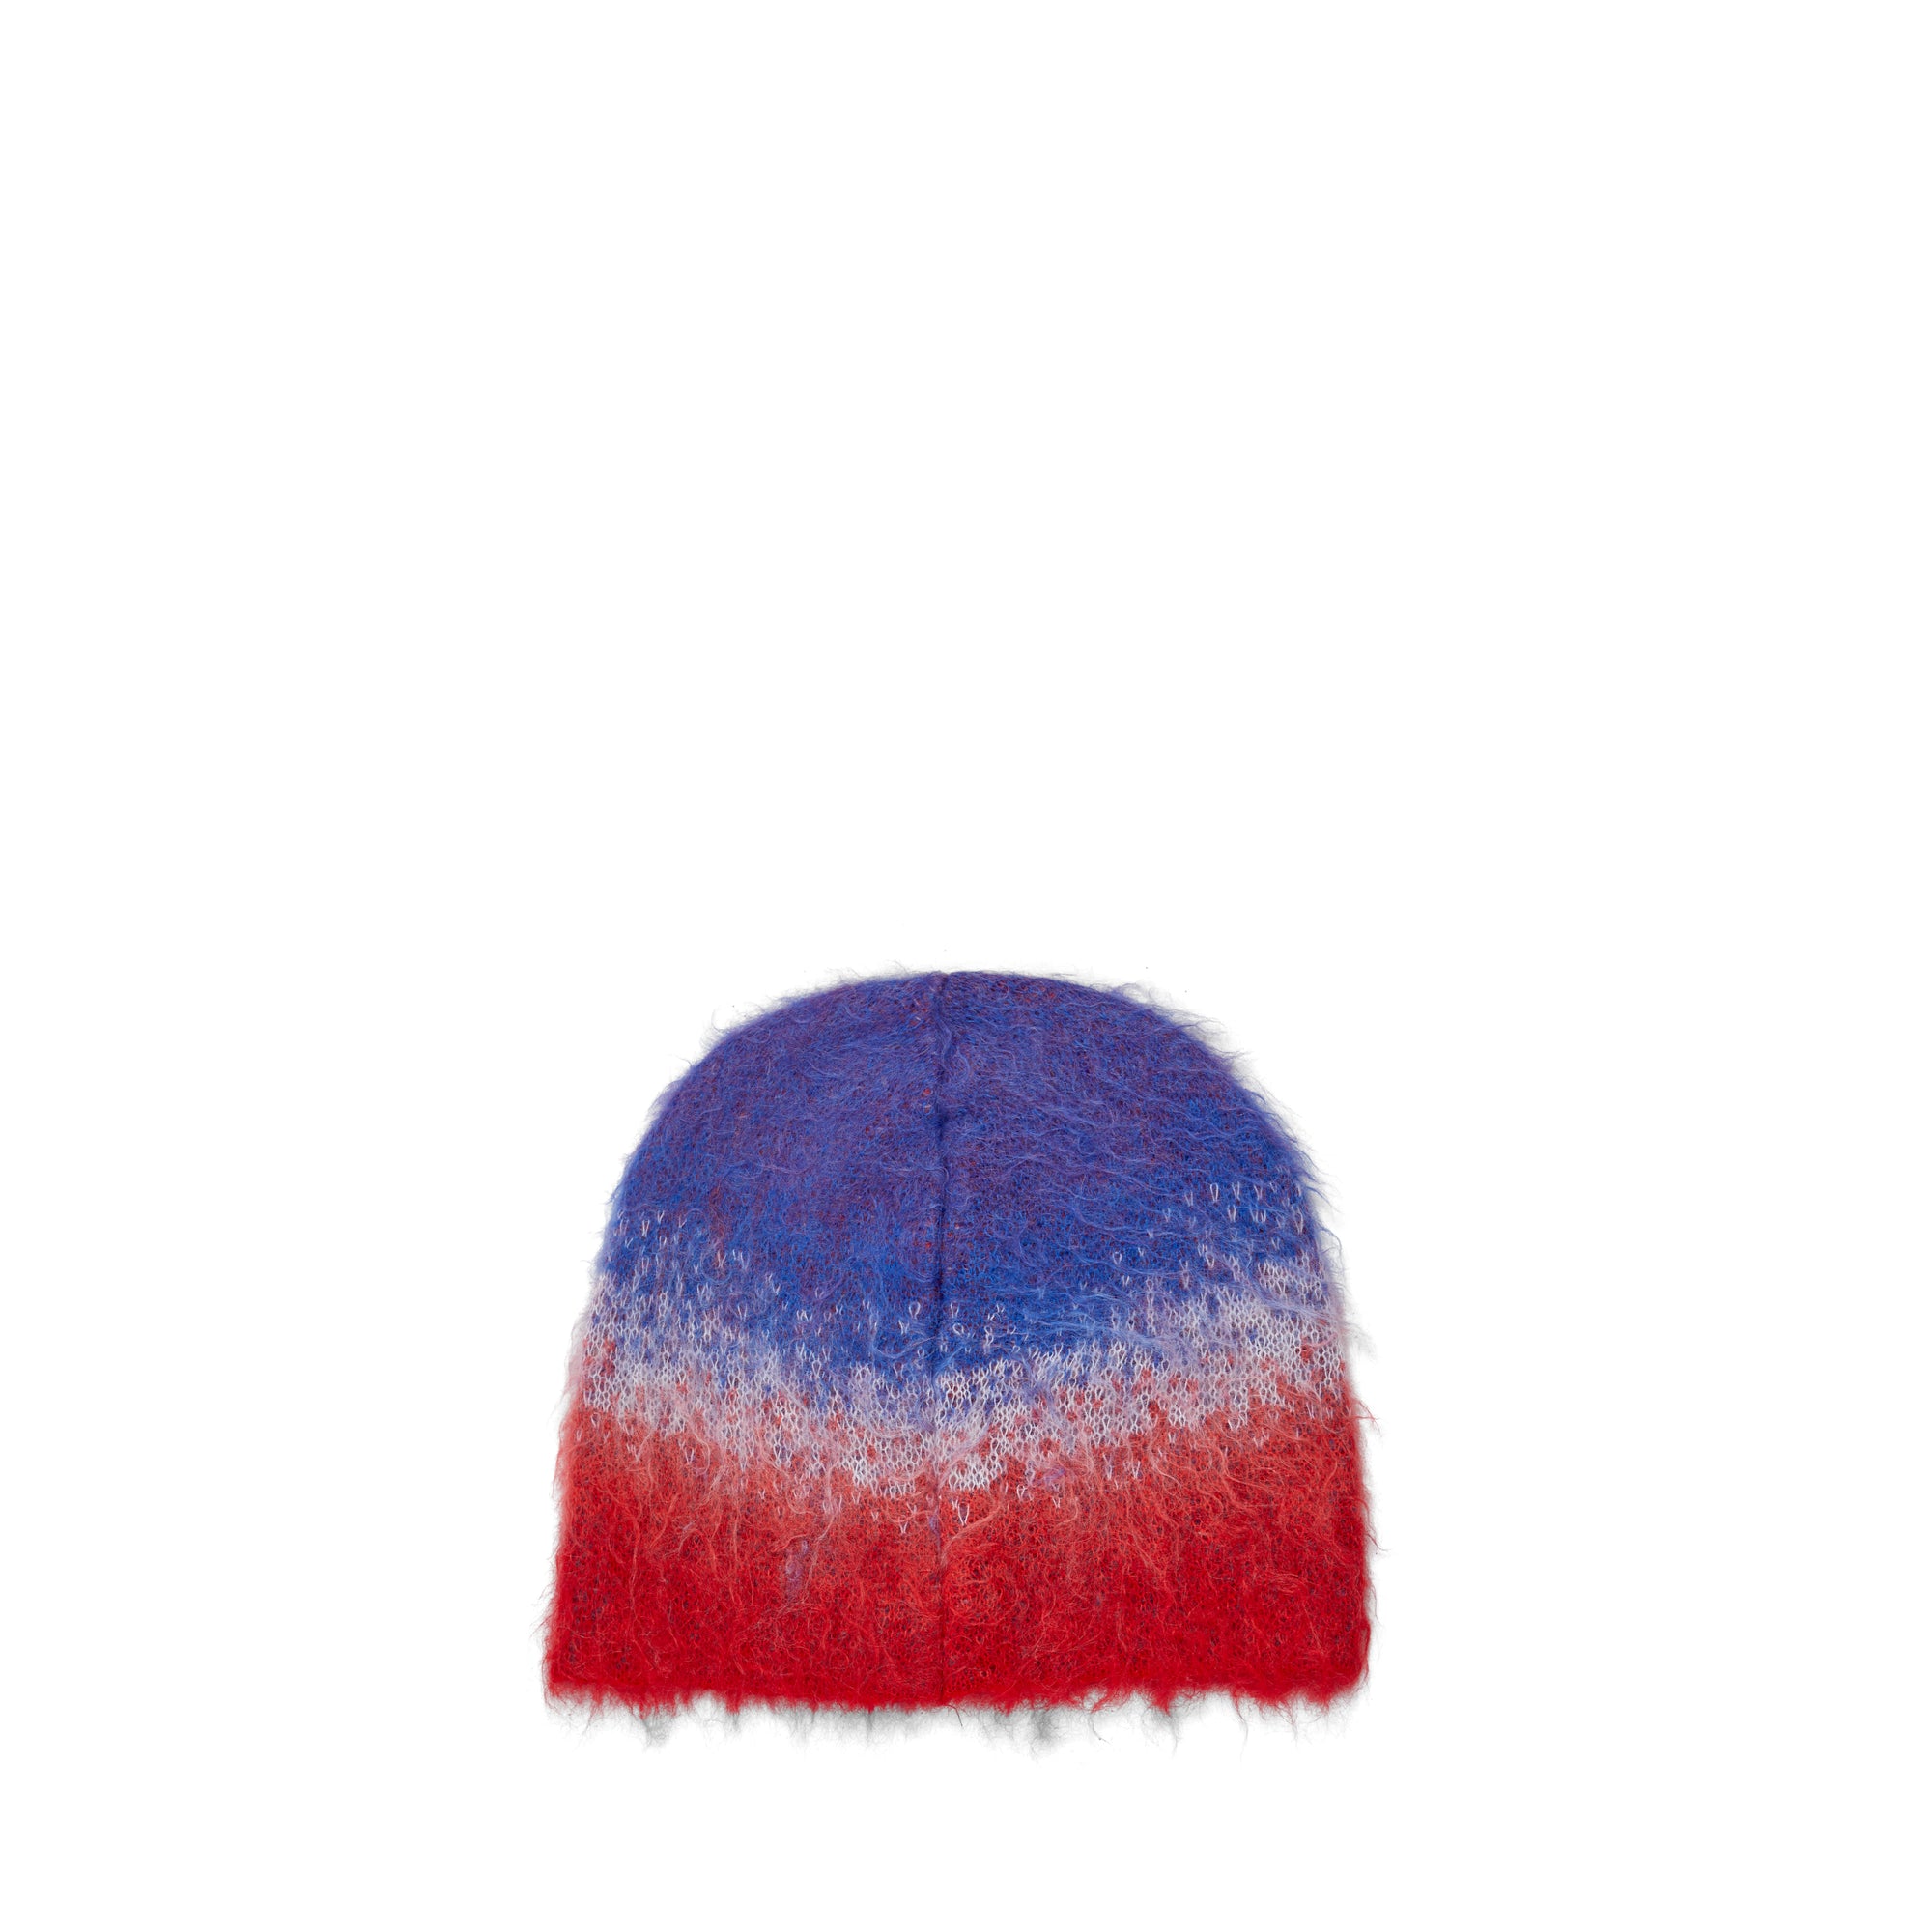 ERL - Degrade Beanie Knit - (Blue/Red) view 2